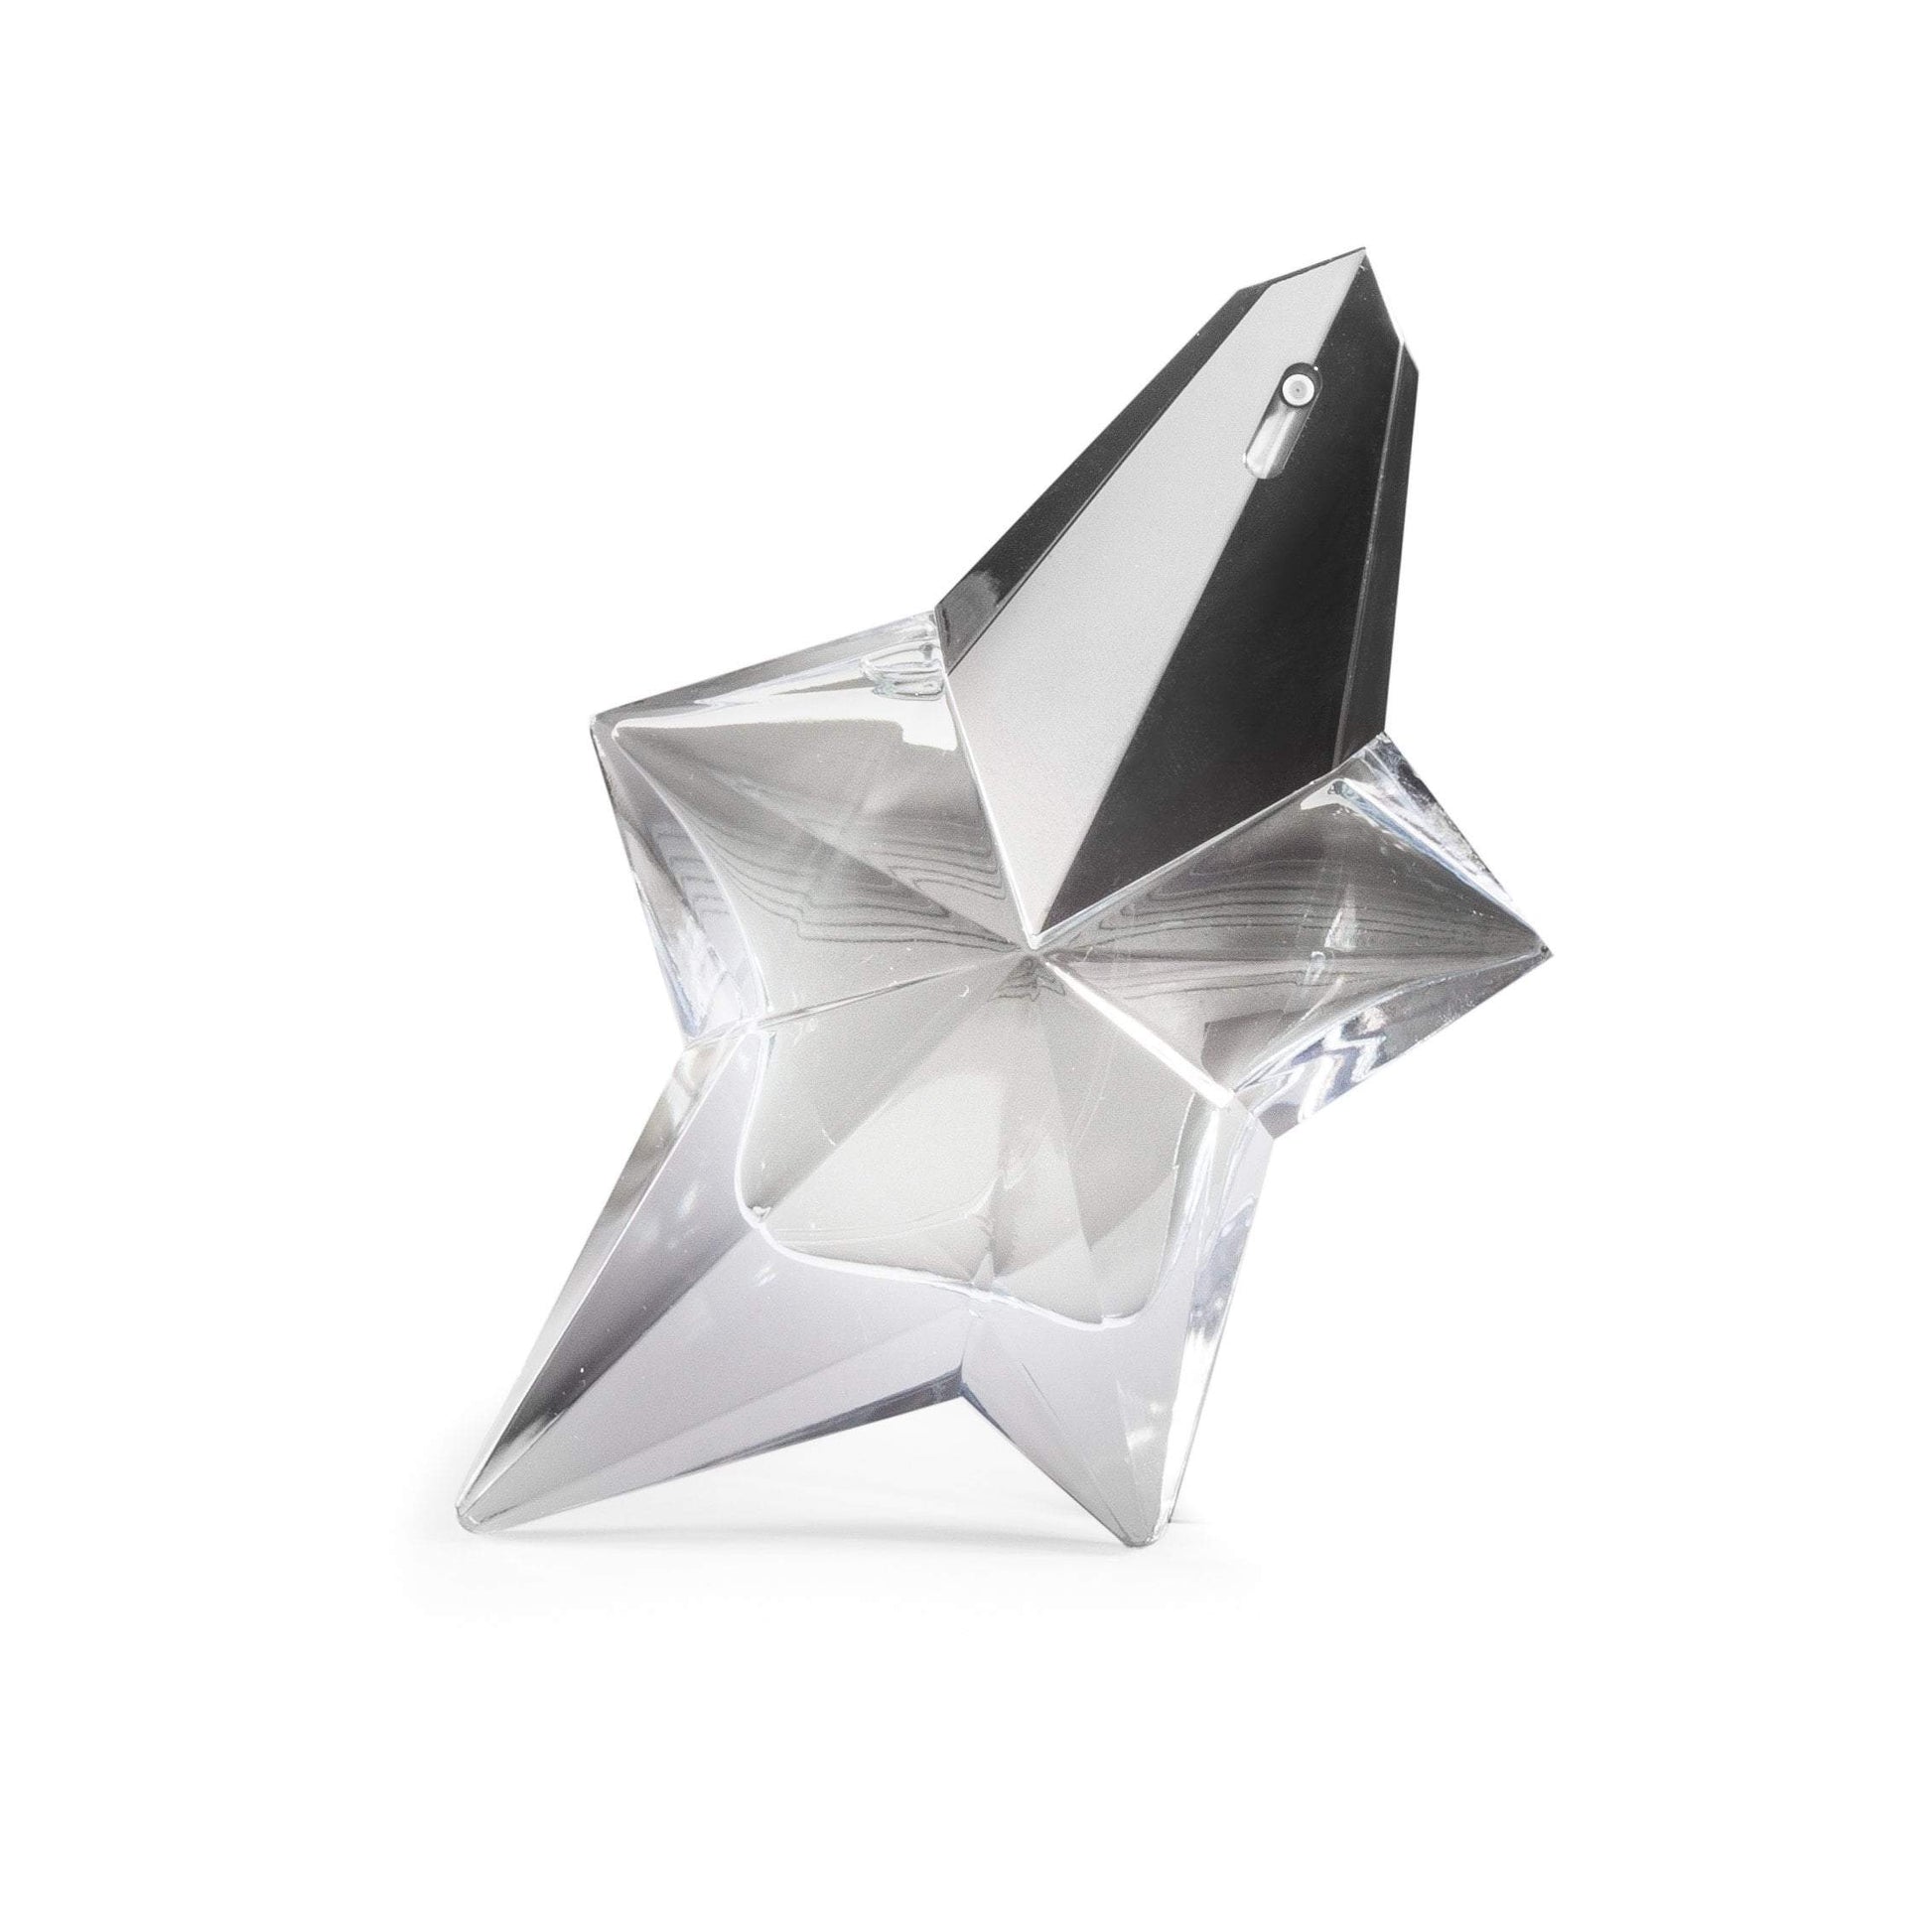 Angel Non Refillable Eau de Parfum Spray for Women by Thierry Mugler, Product image 2